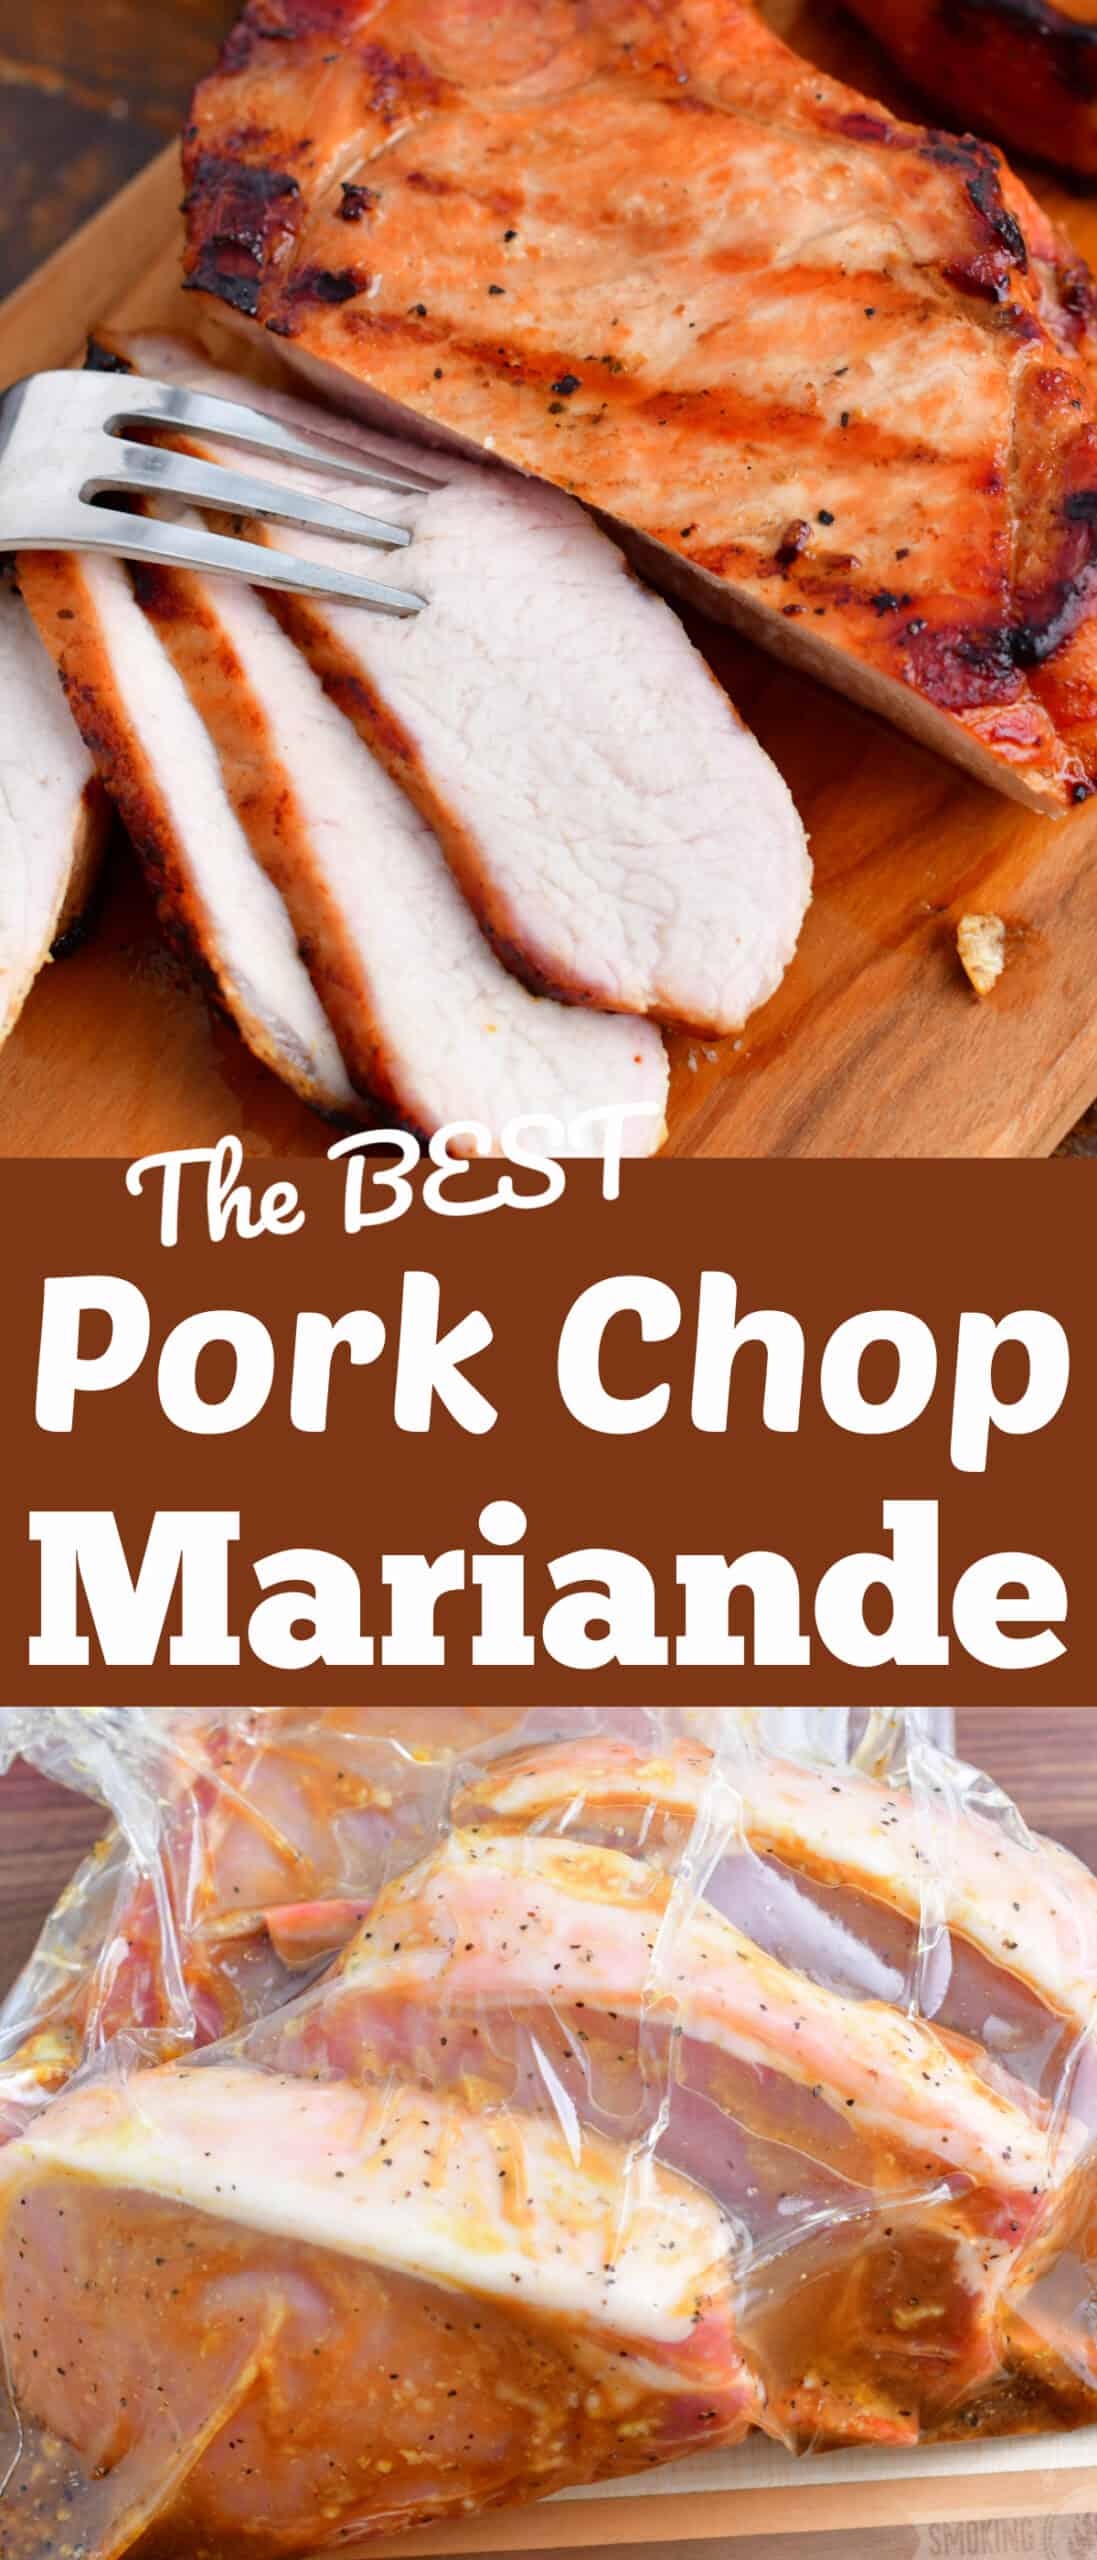 title collage of sliced pork chop and marinating pork